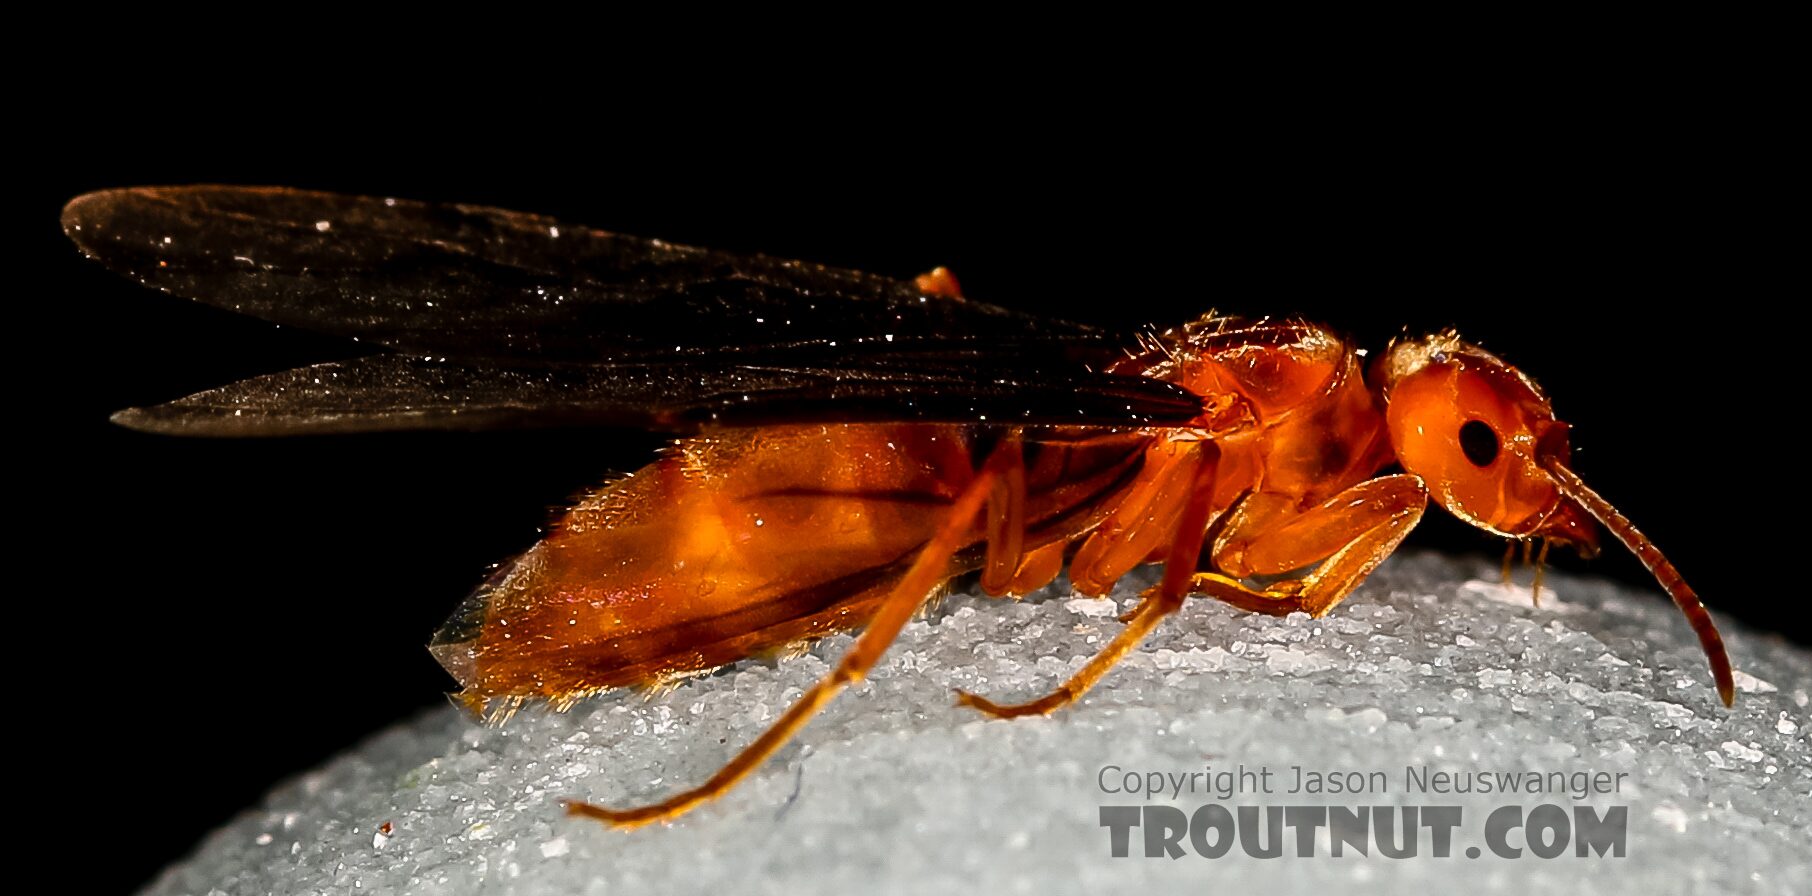 Formicidae (Ants) Ant Adult from the Henry's Fork of the Snake River in Idaho